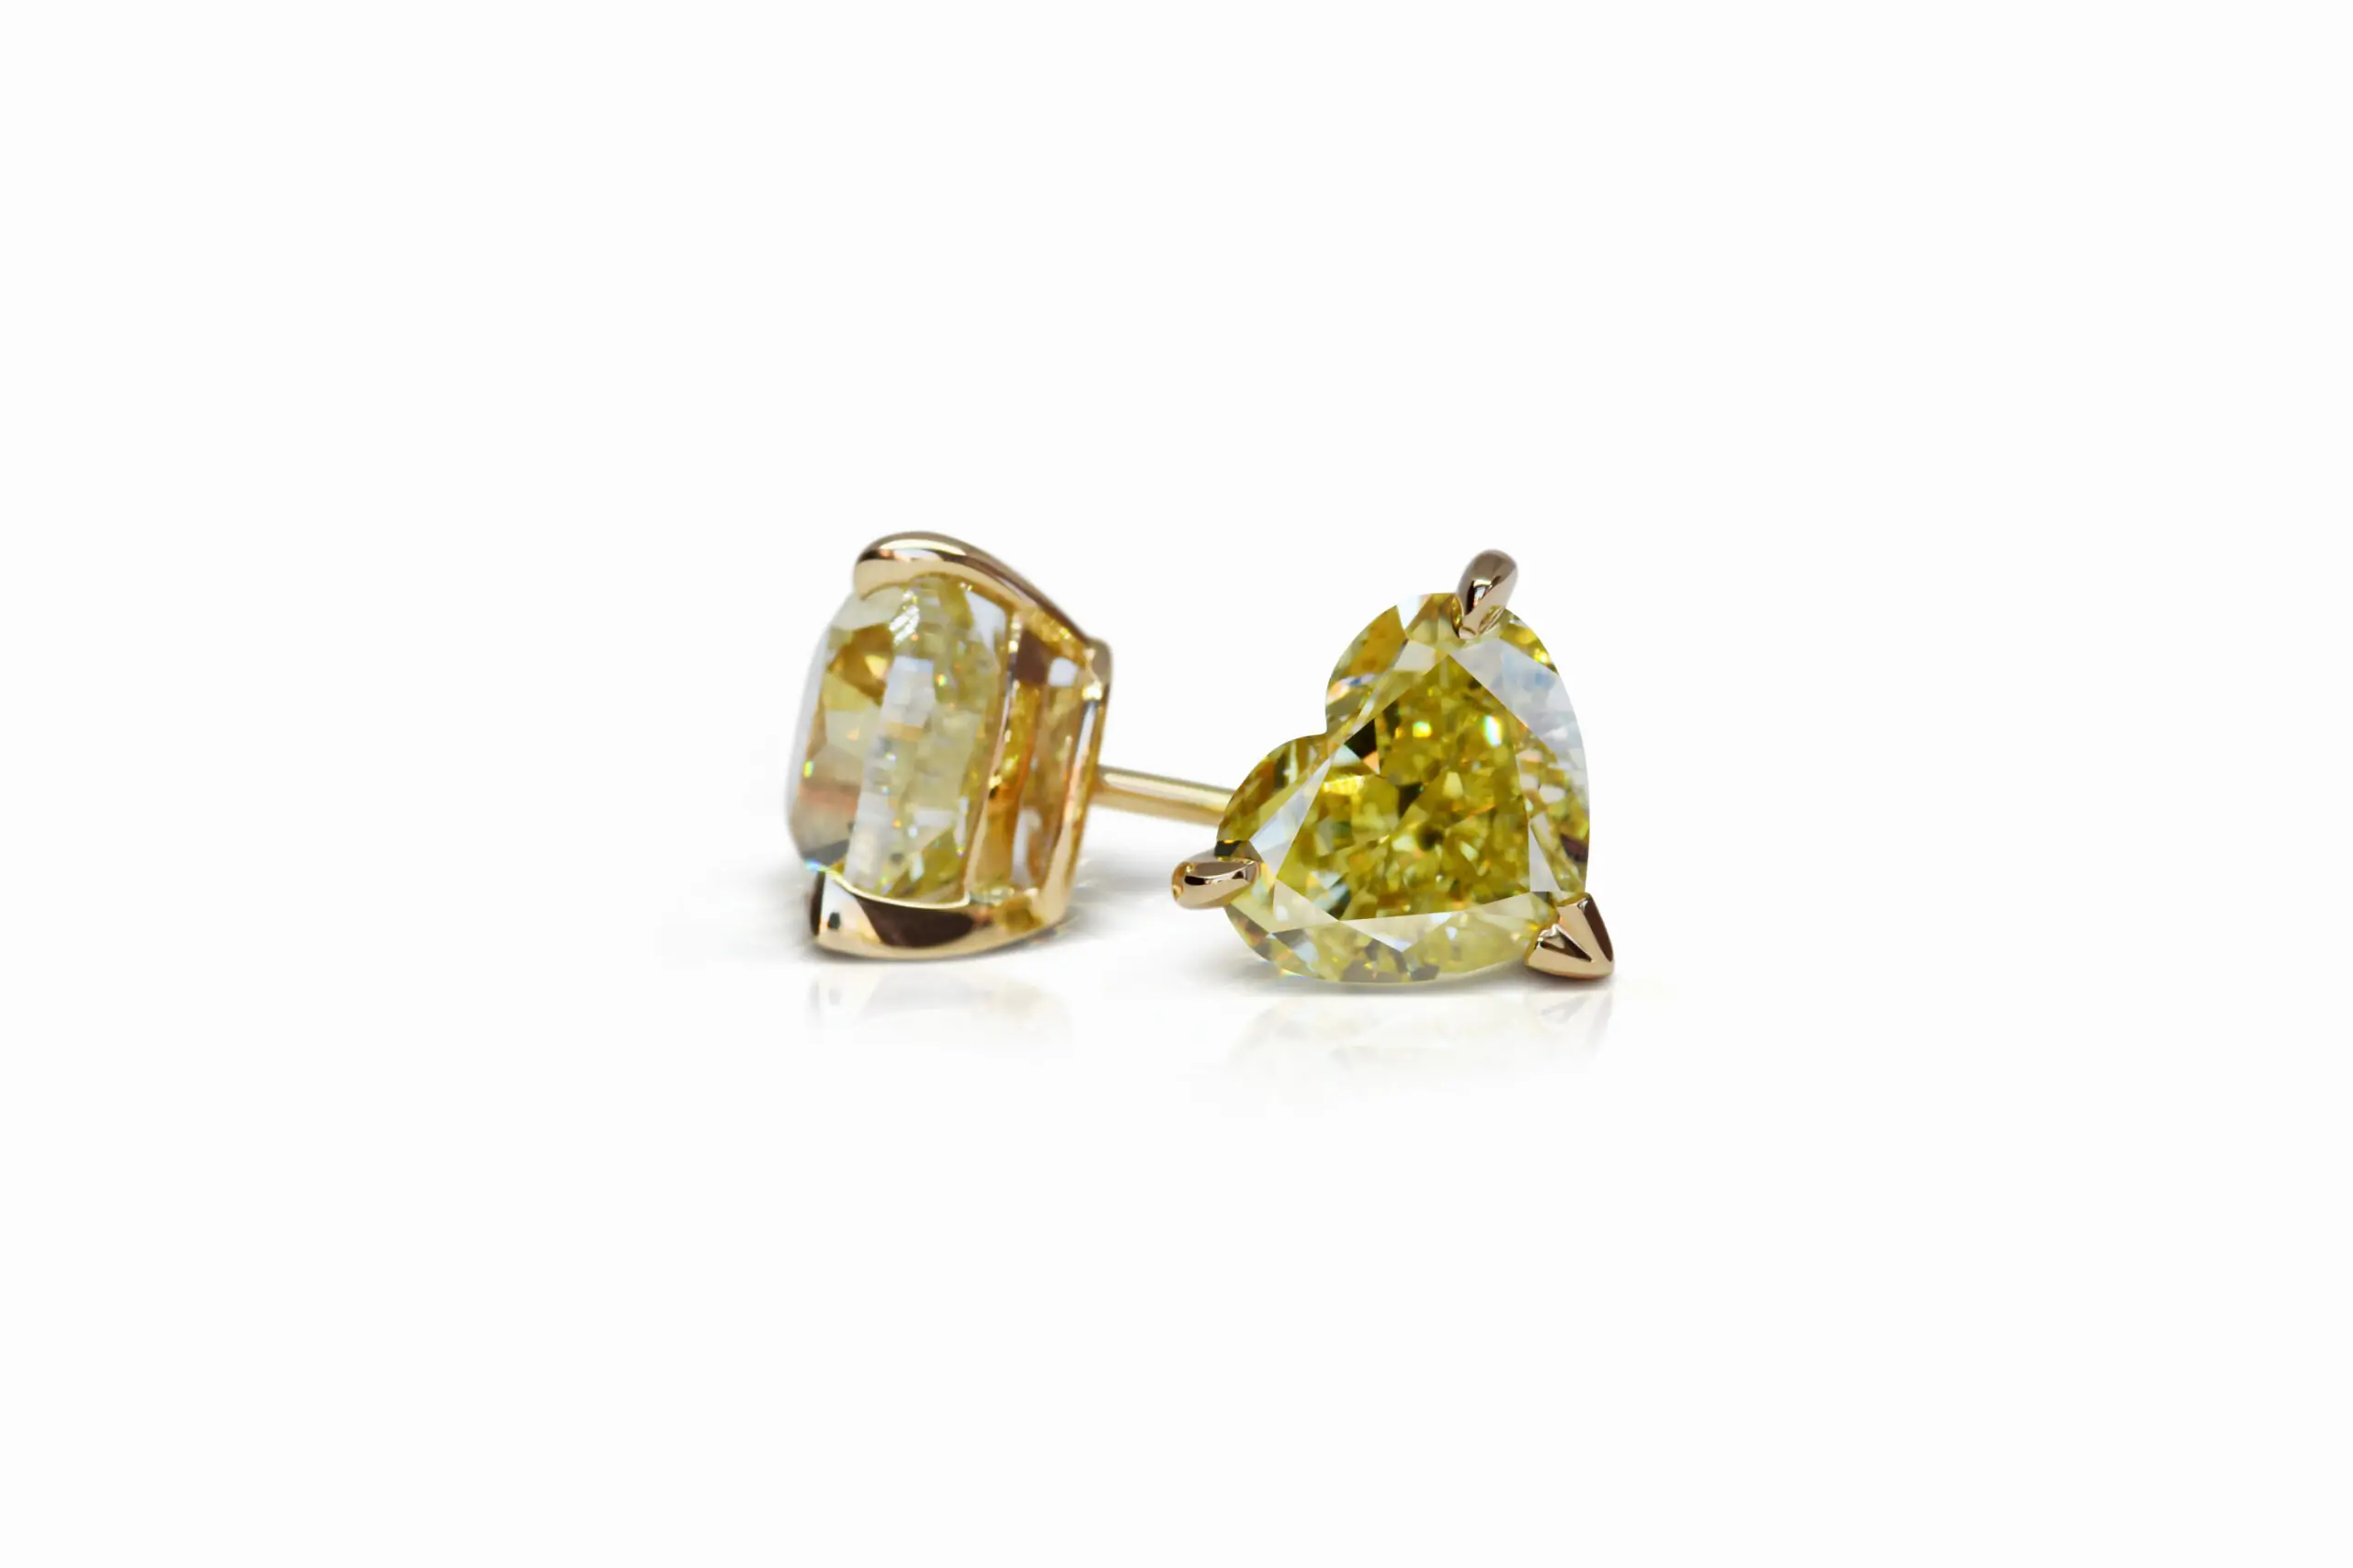 3.01 and 3.01 carat Pair of Studs Fancy Intense Yellow VS2/SI1 Heart Shape Diamonds GIA - thumb picture 1